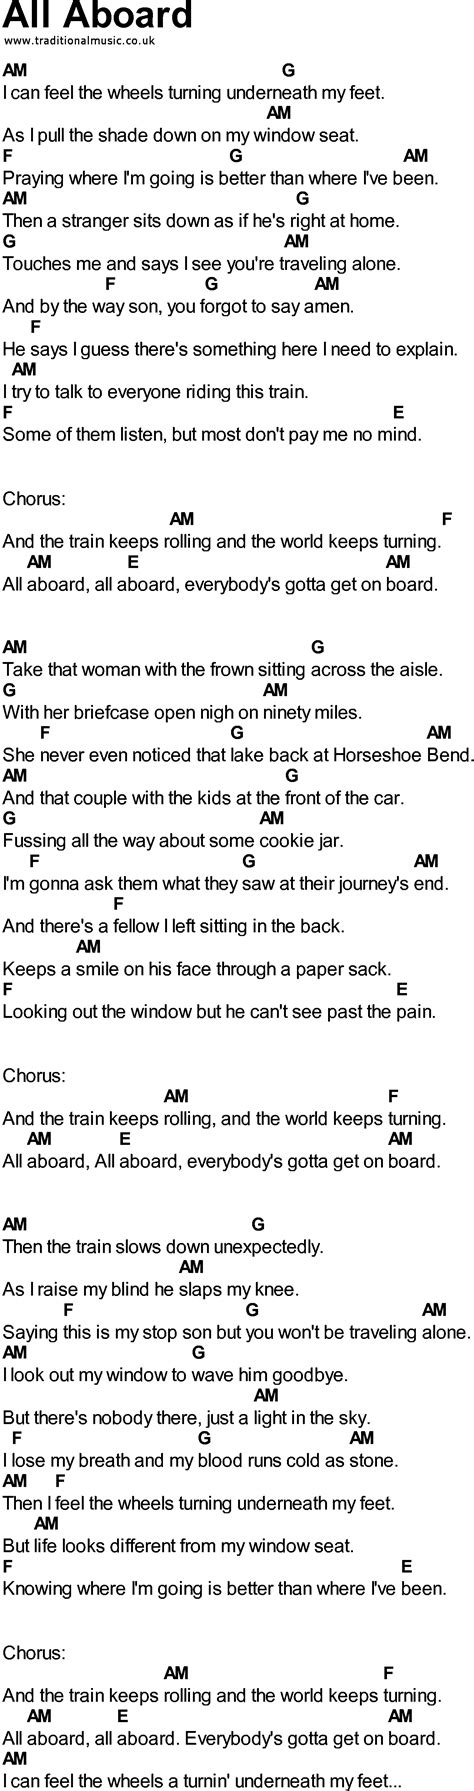 Bluegrass Songs With Chords All Aboard Lyrics And Chords Songs